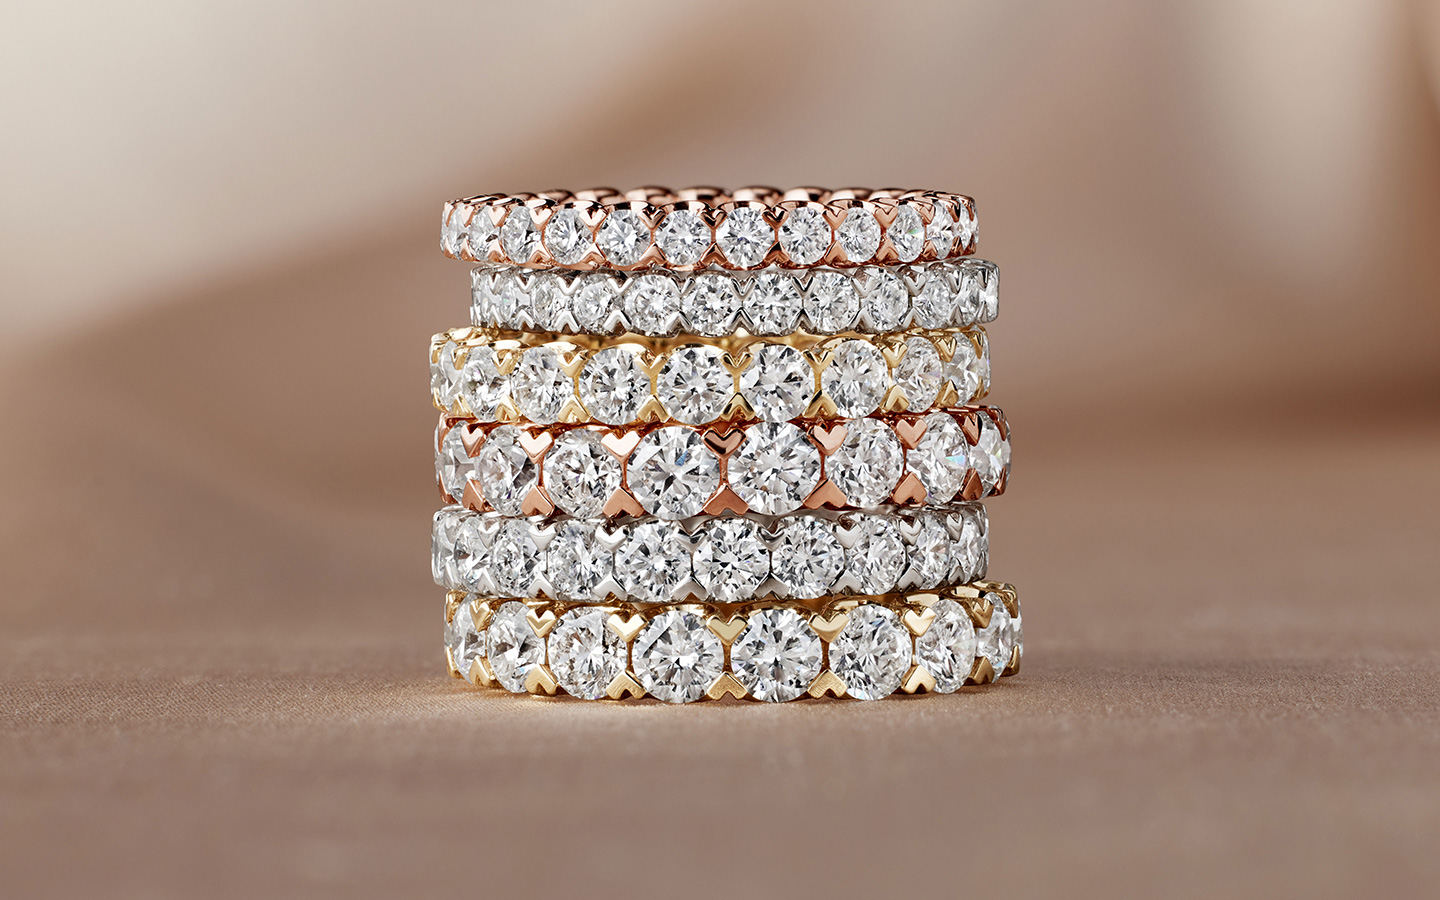 Wedding bands in yellow gold, rose gold and white gold all with diamonds.